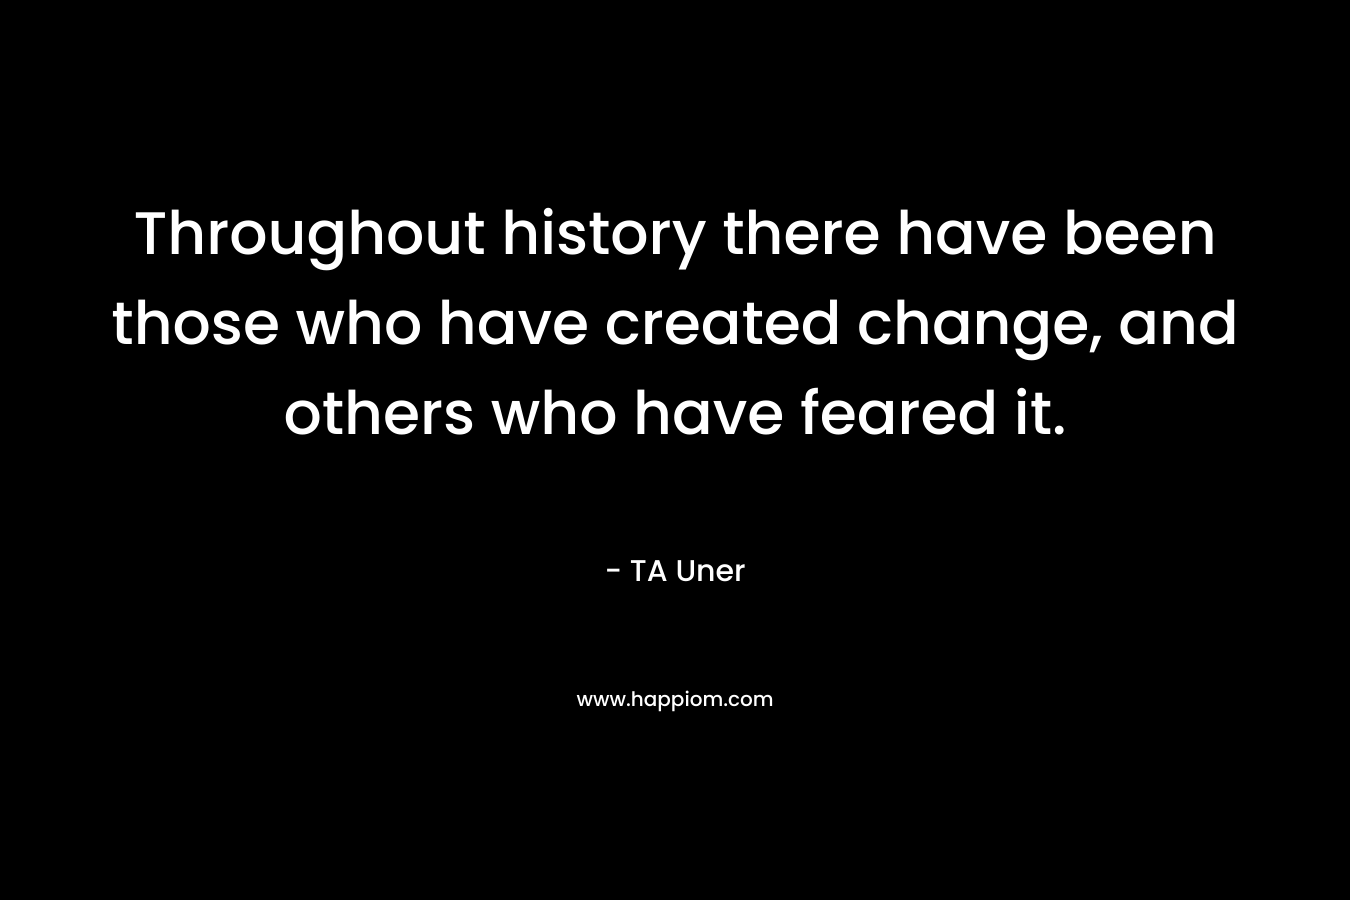 Throughout history there have been those who have created change, and others who have feared it. – TA Uner